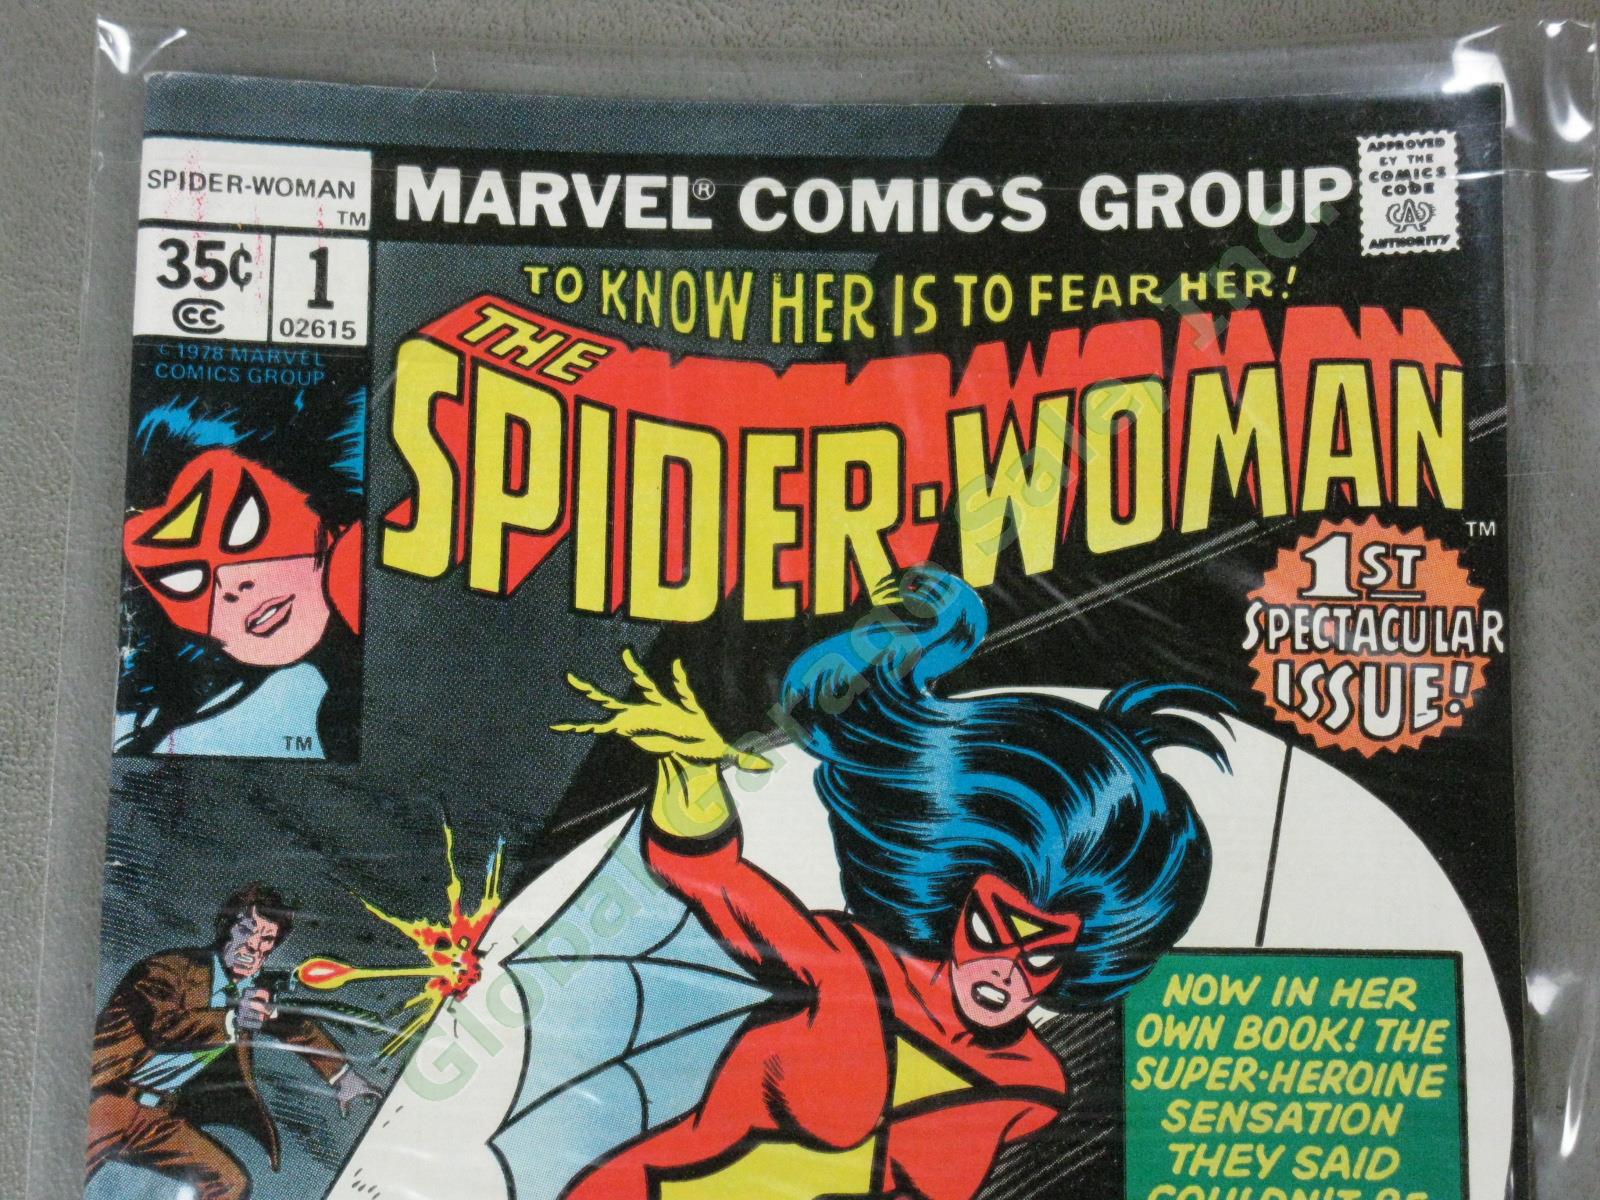 48 Vtg Marvel Spider-Woman Comic Book Collection Lot Runs 1-8 10-36 38-40 42-50 1